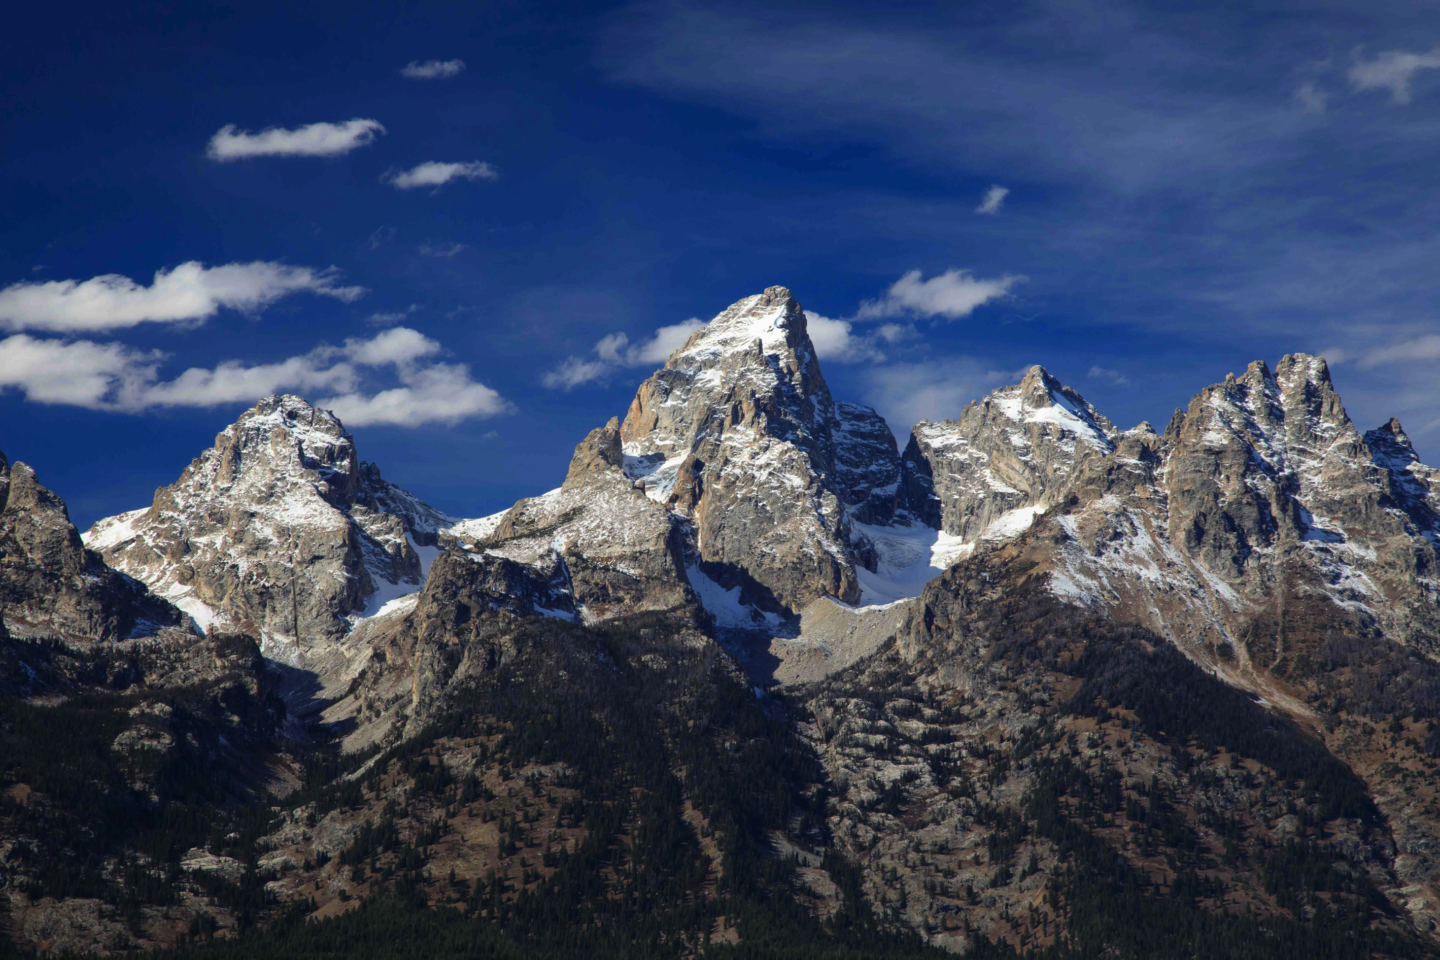 A Dramatic Image Of The Grand Tetons On A Sunny, Blue Sky Day